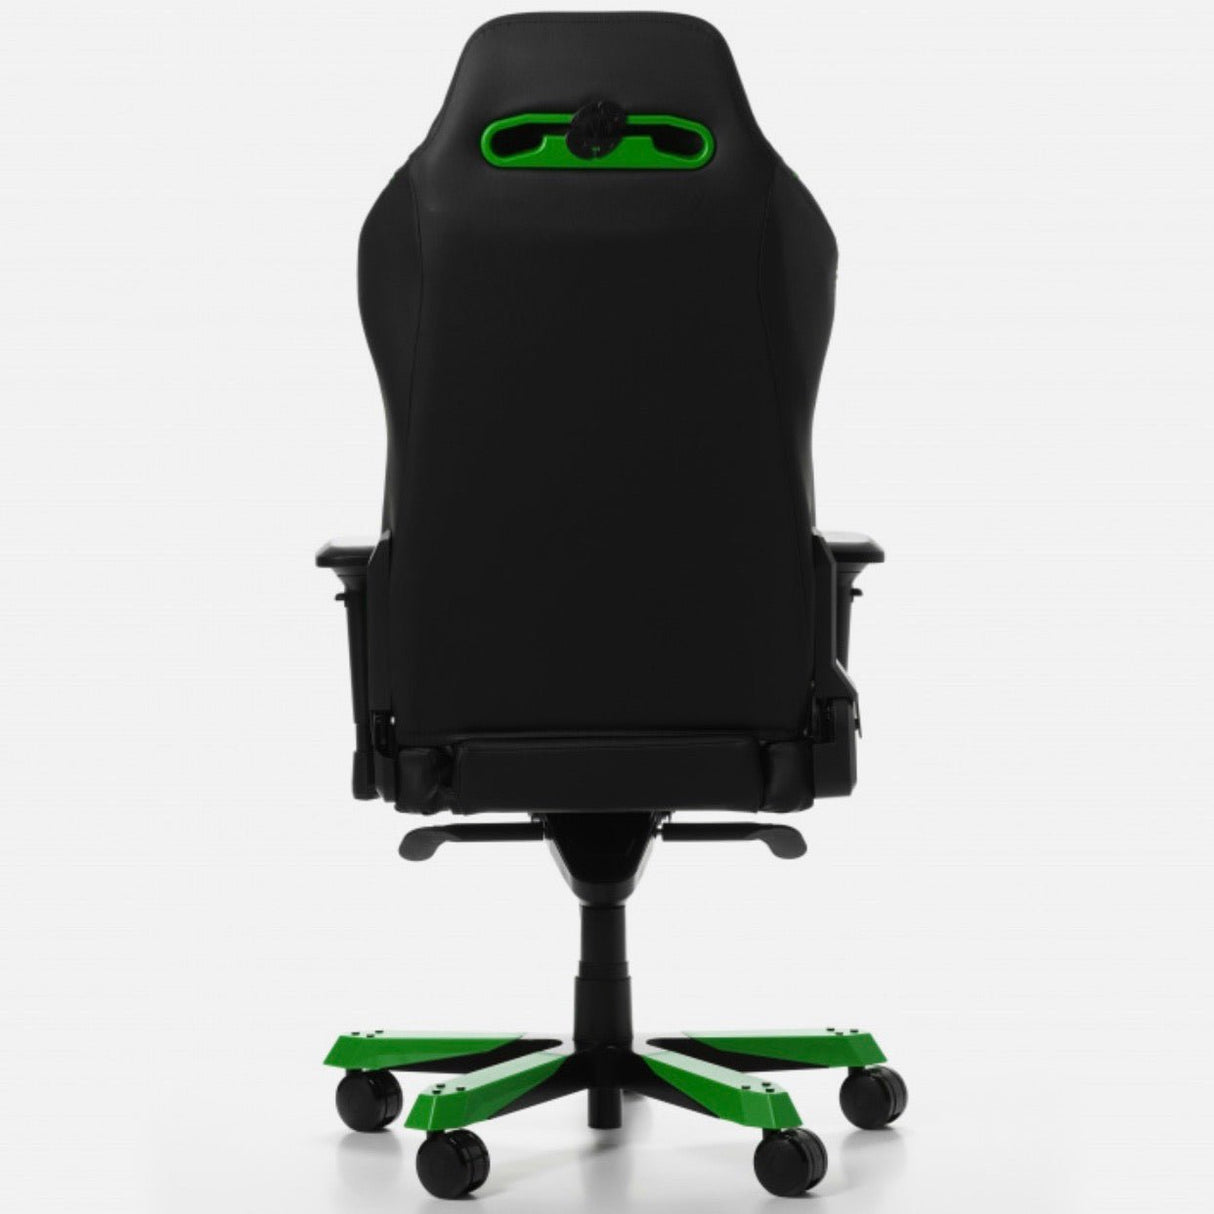 DXRacer Iron Series Gaming Chair - BLACK/GREEN - Level UpLevel UpGaming ChairGC-I166-NG-S2